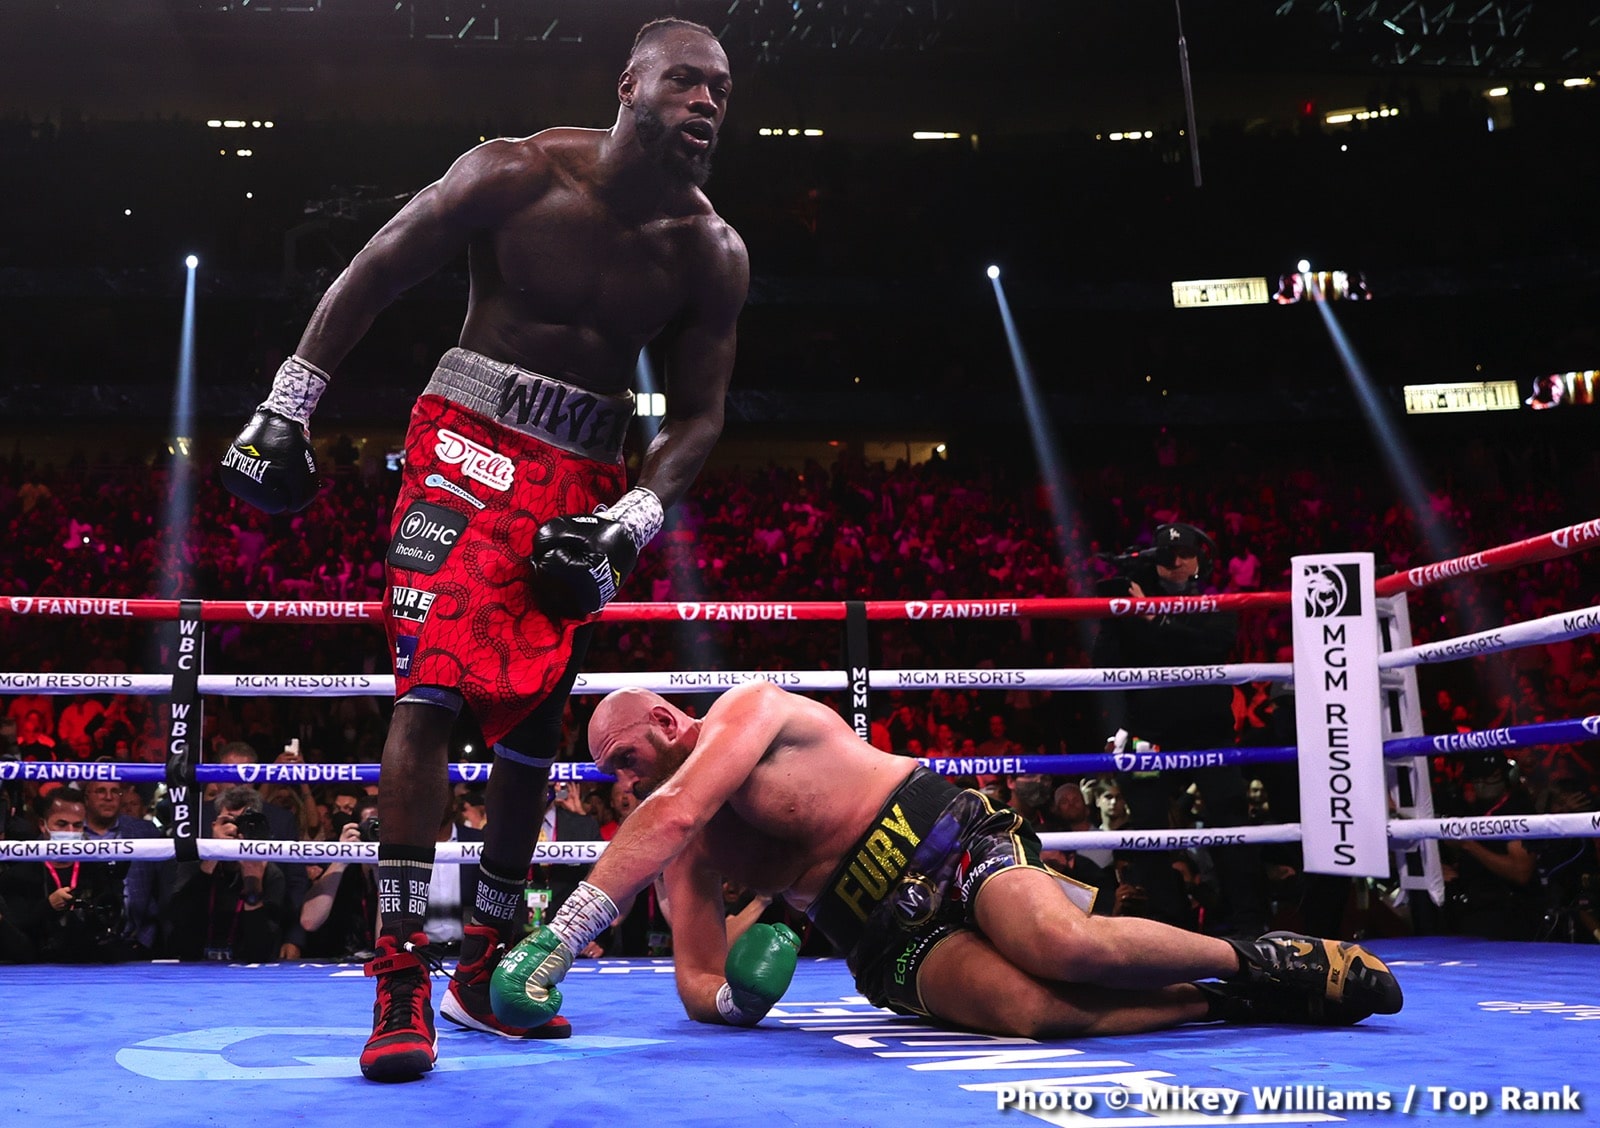 Deontay Wilder thinking of retirement, says he accomplished his goals